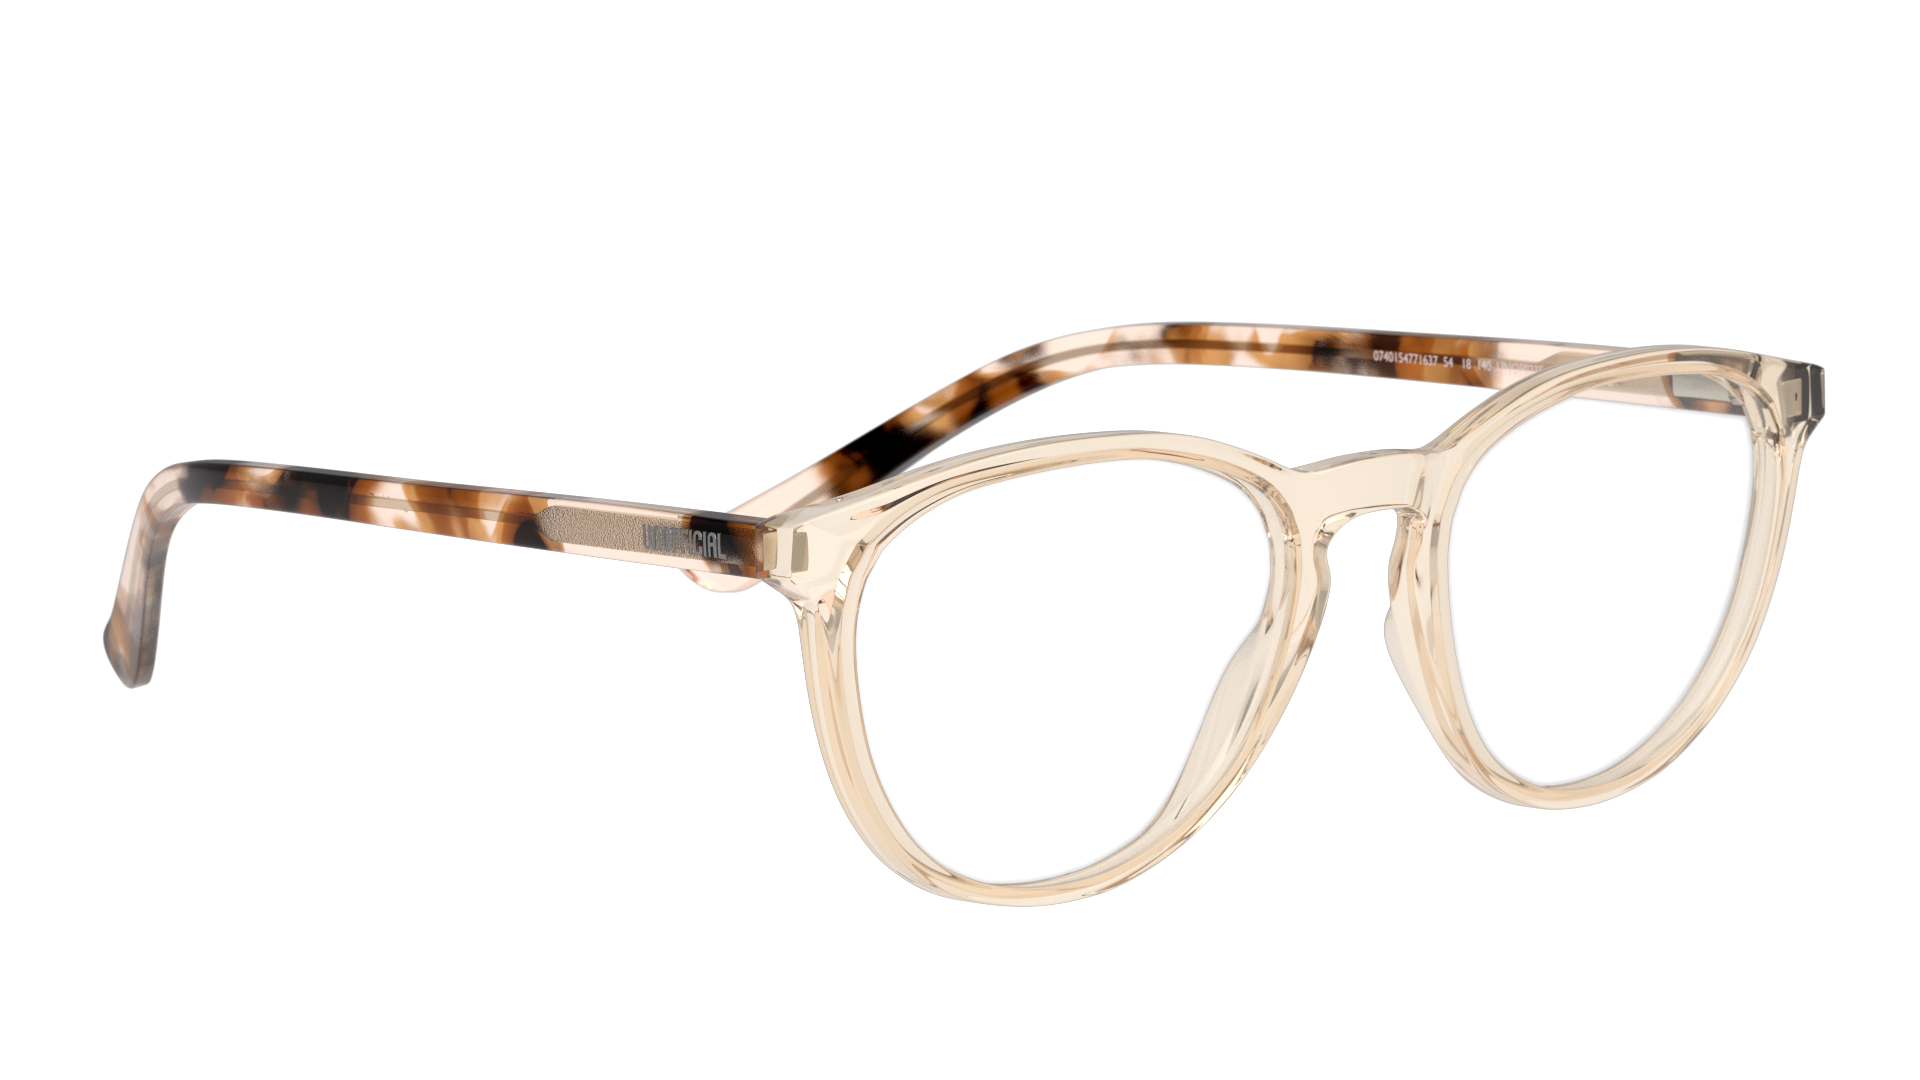 Angle_Right01 Unofficial UNOF0235 (FH00) Glasses Transparent / Beige